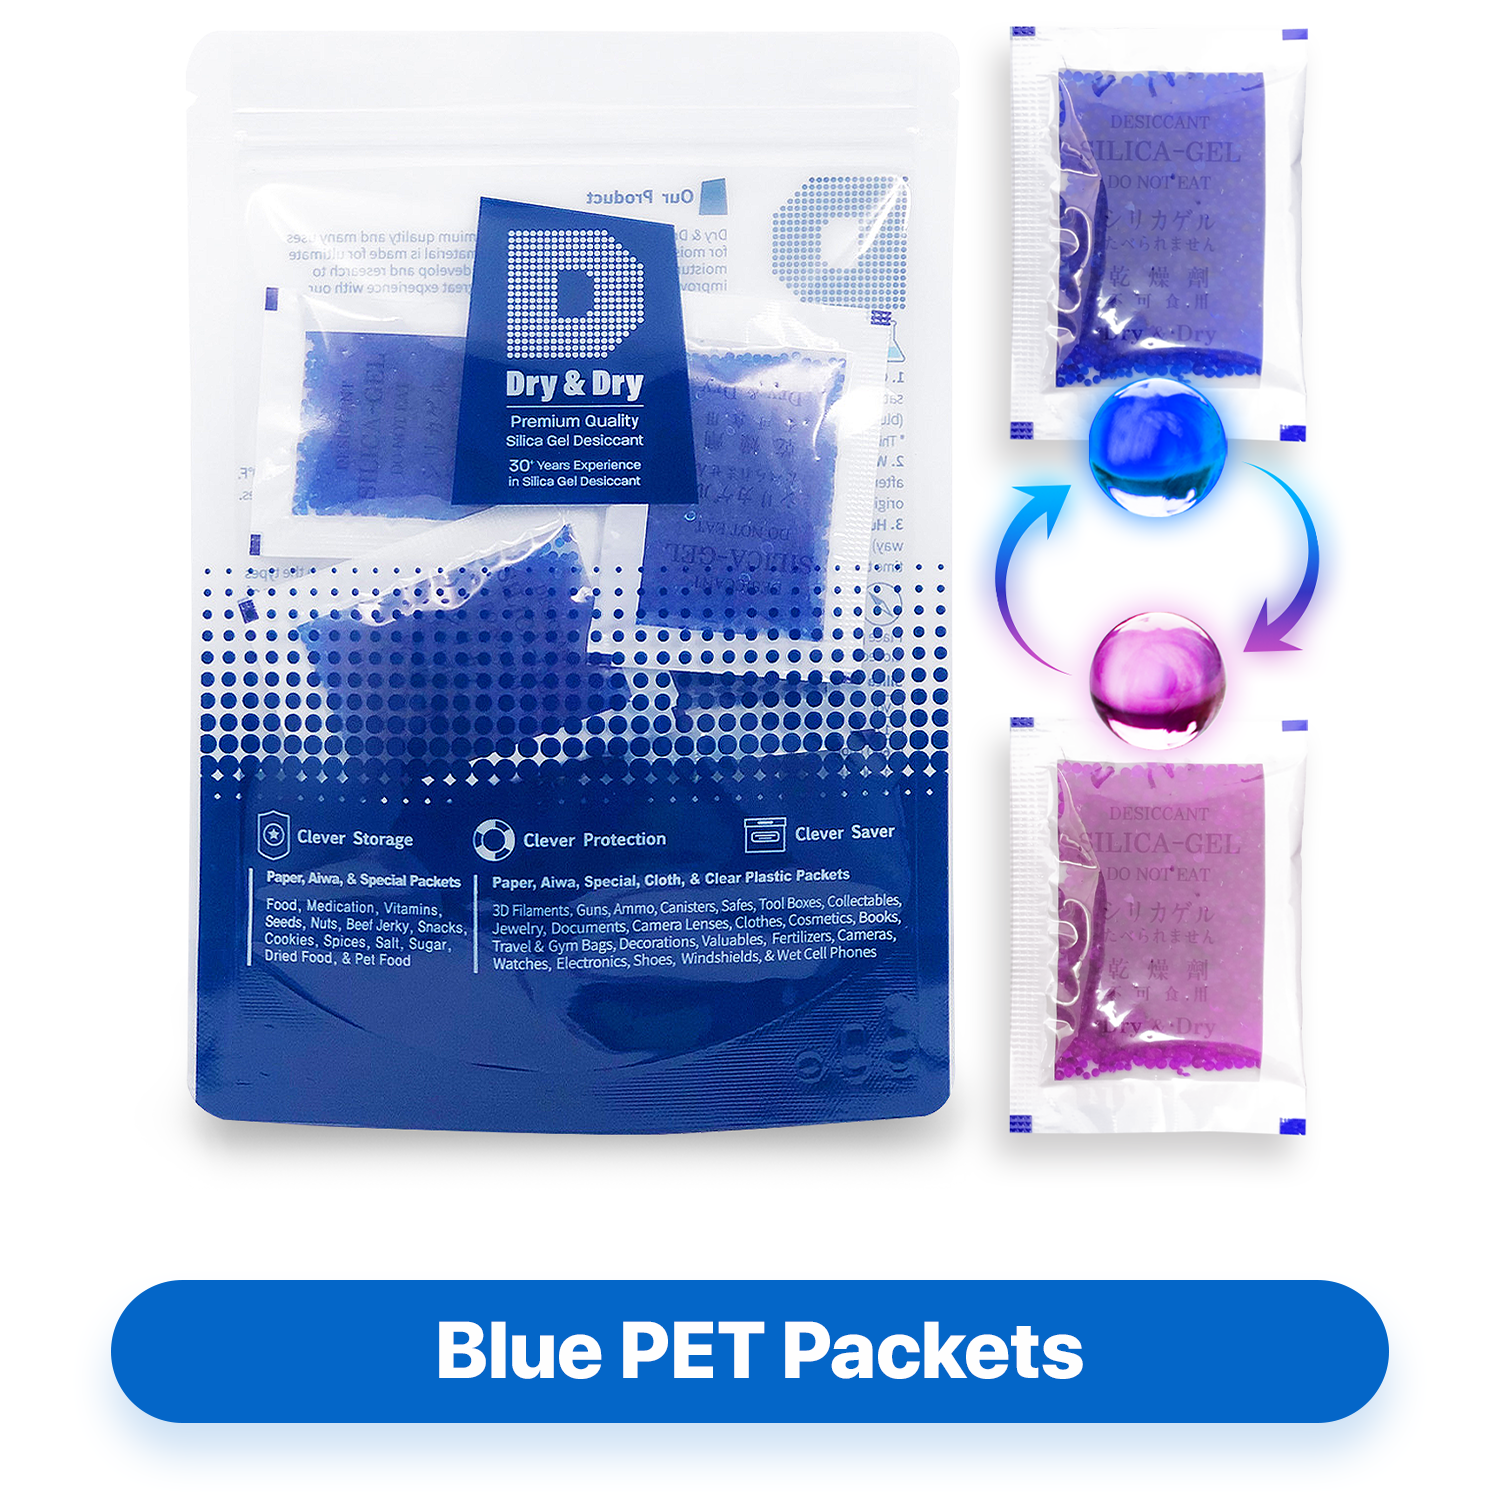 10 Gram Blue Indicating Clear Plastic(PET) Silica Gel Packets